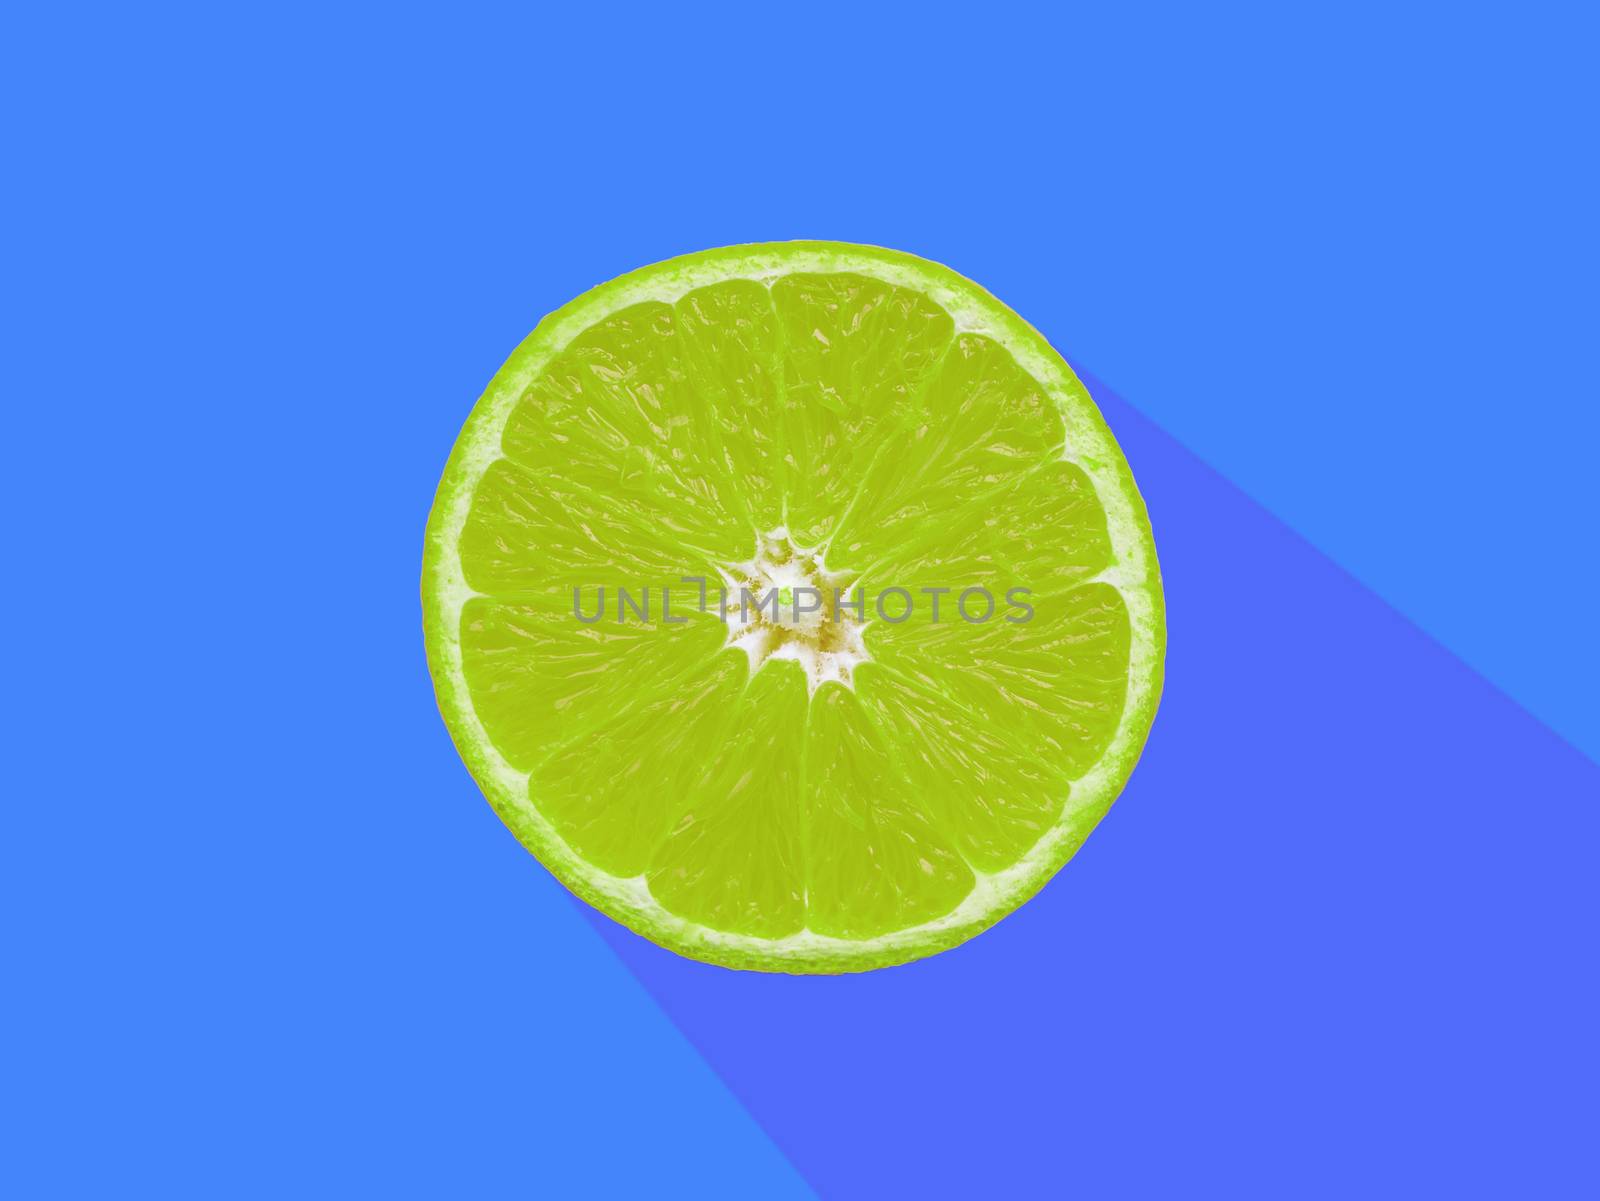 abstract pattern background : Green lime slices on blue background, pop art style